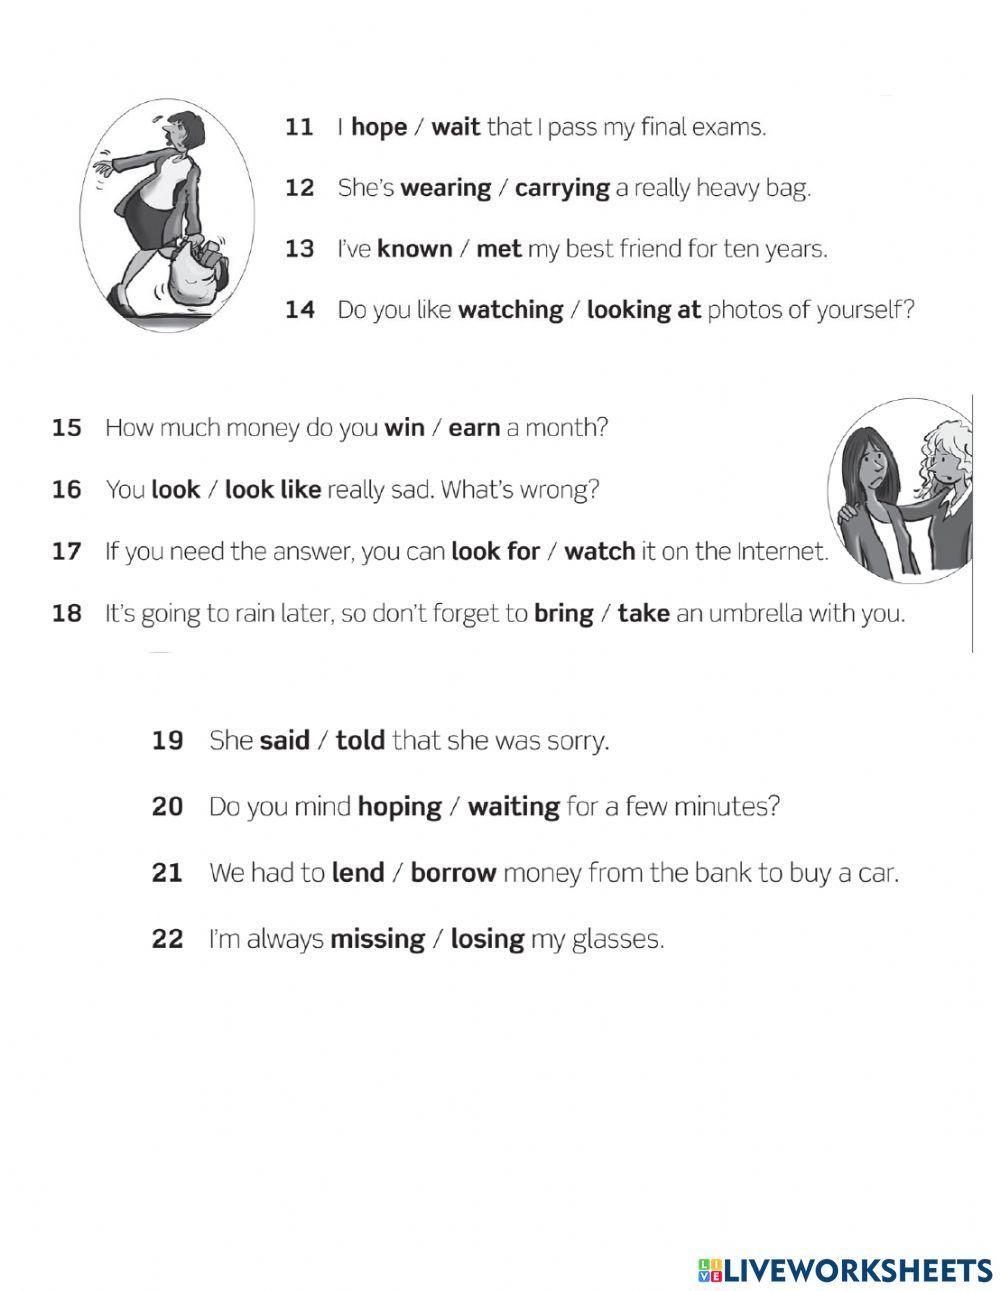 Confusing Verbs